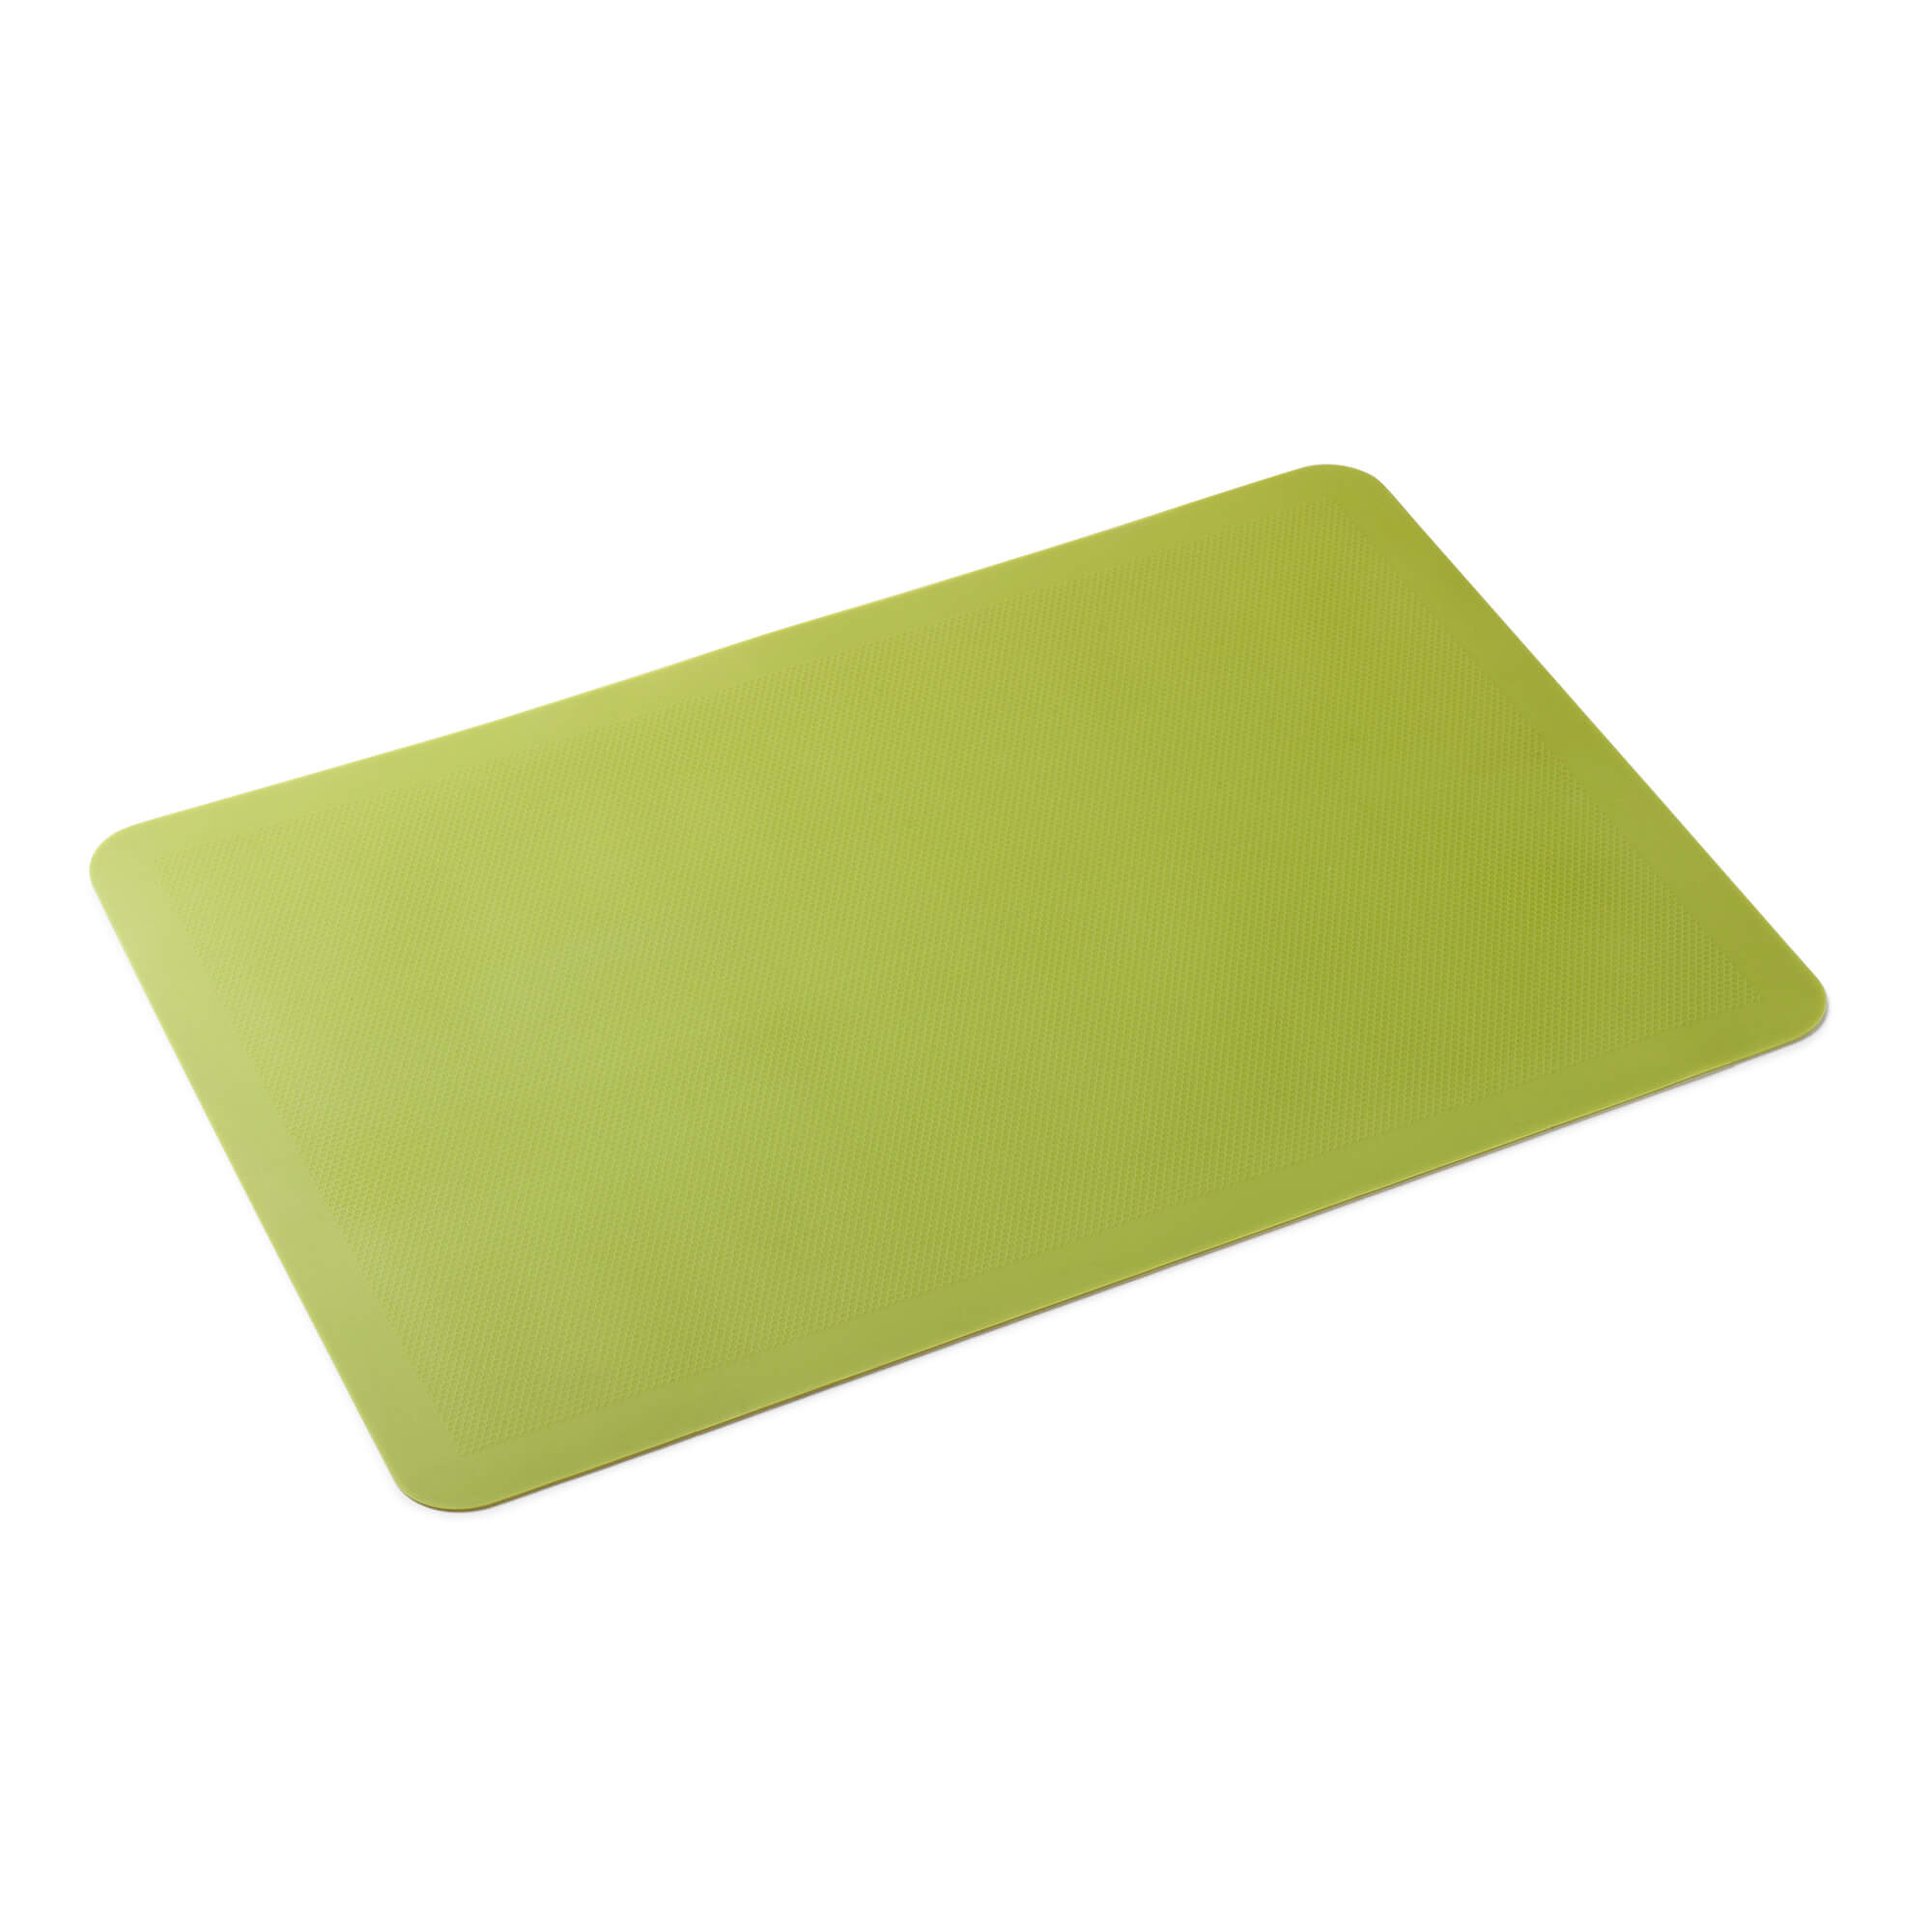 Zeal Non Stick Silicone Baking Sheet in Lime